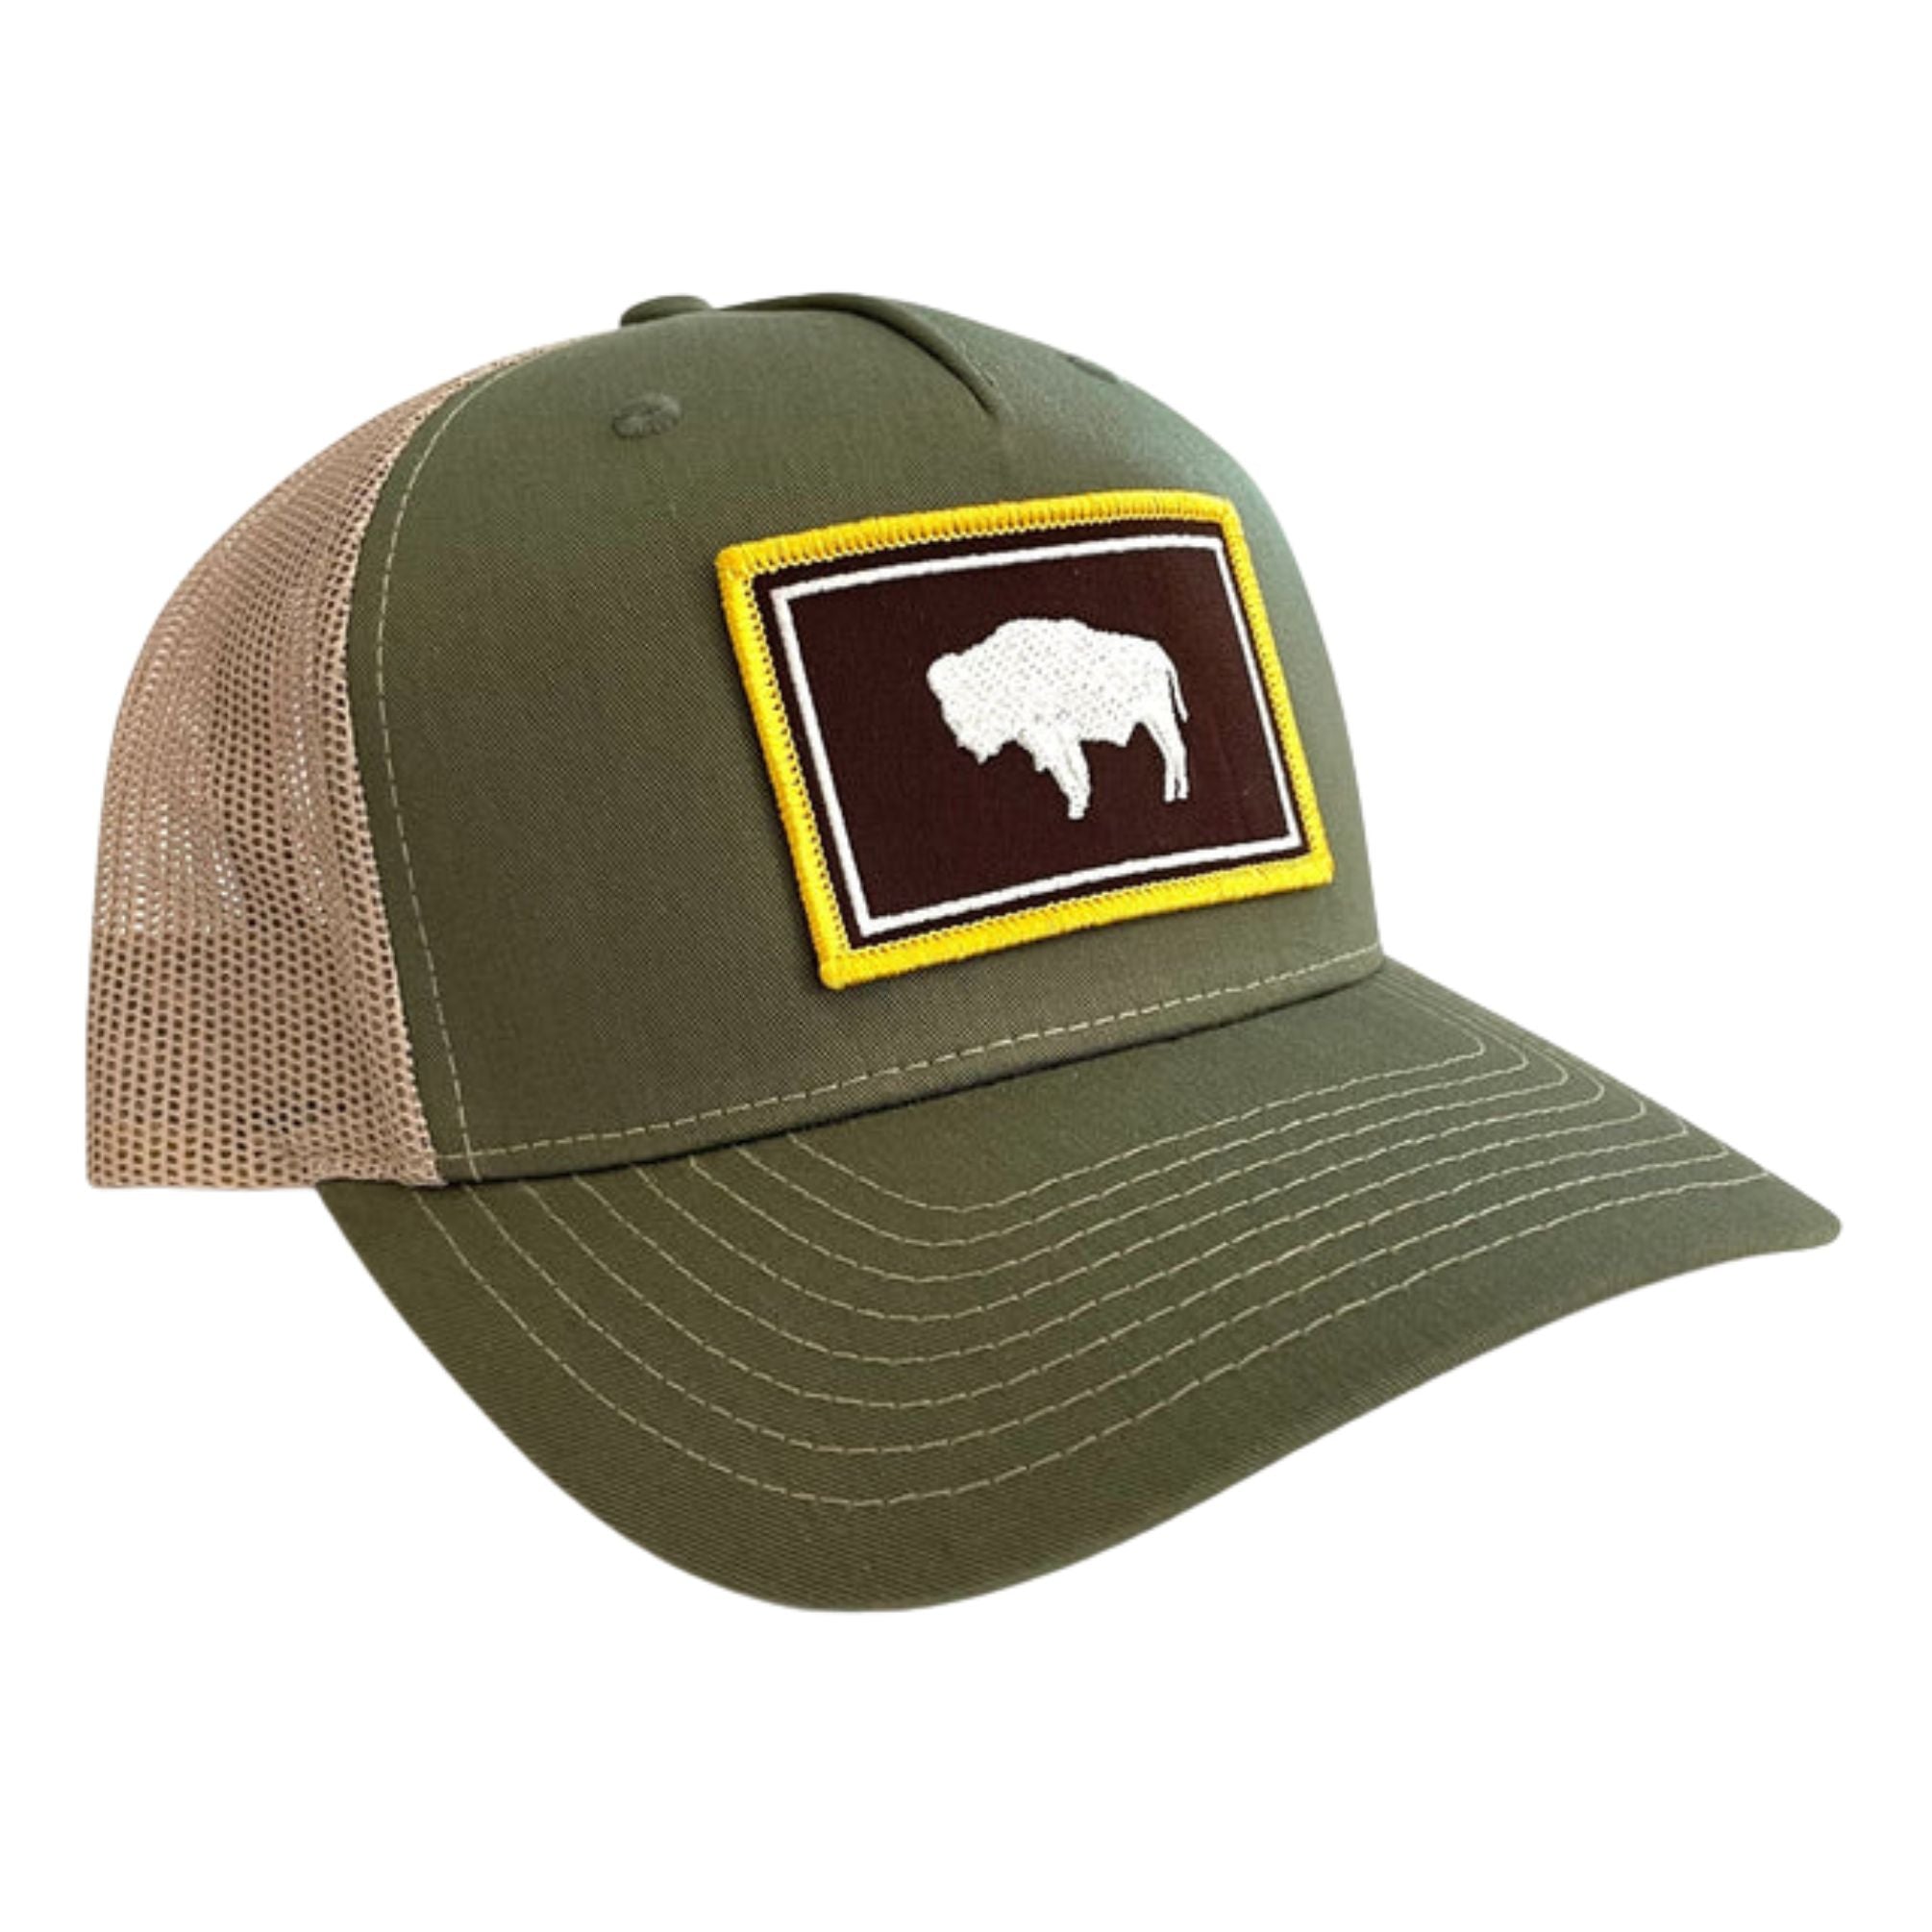 A moss green trucker hat with the wyoming flag in brown and gold